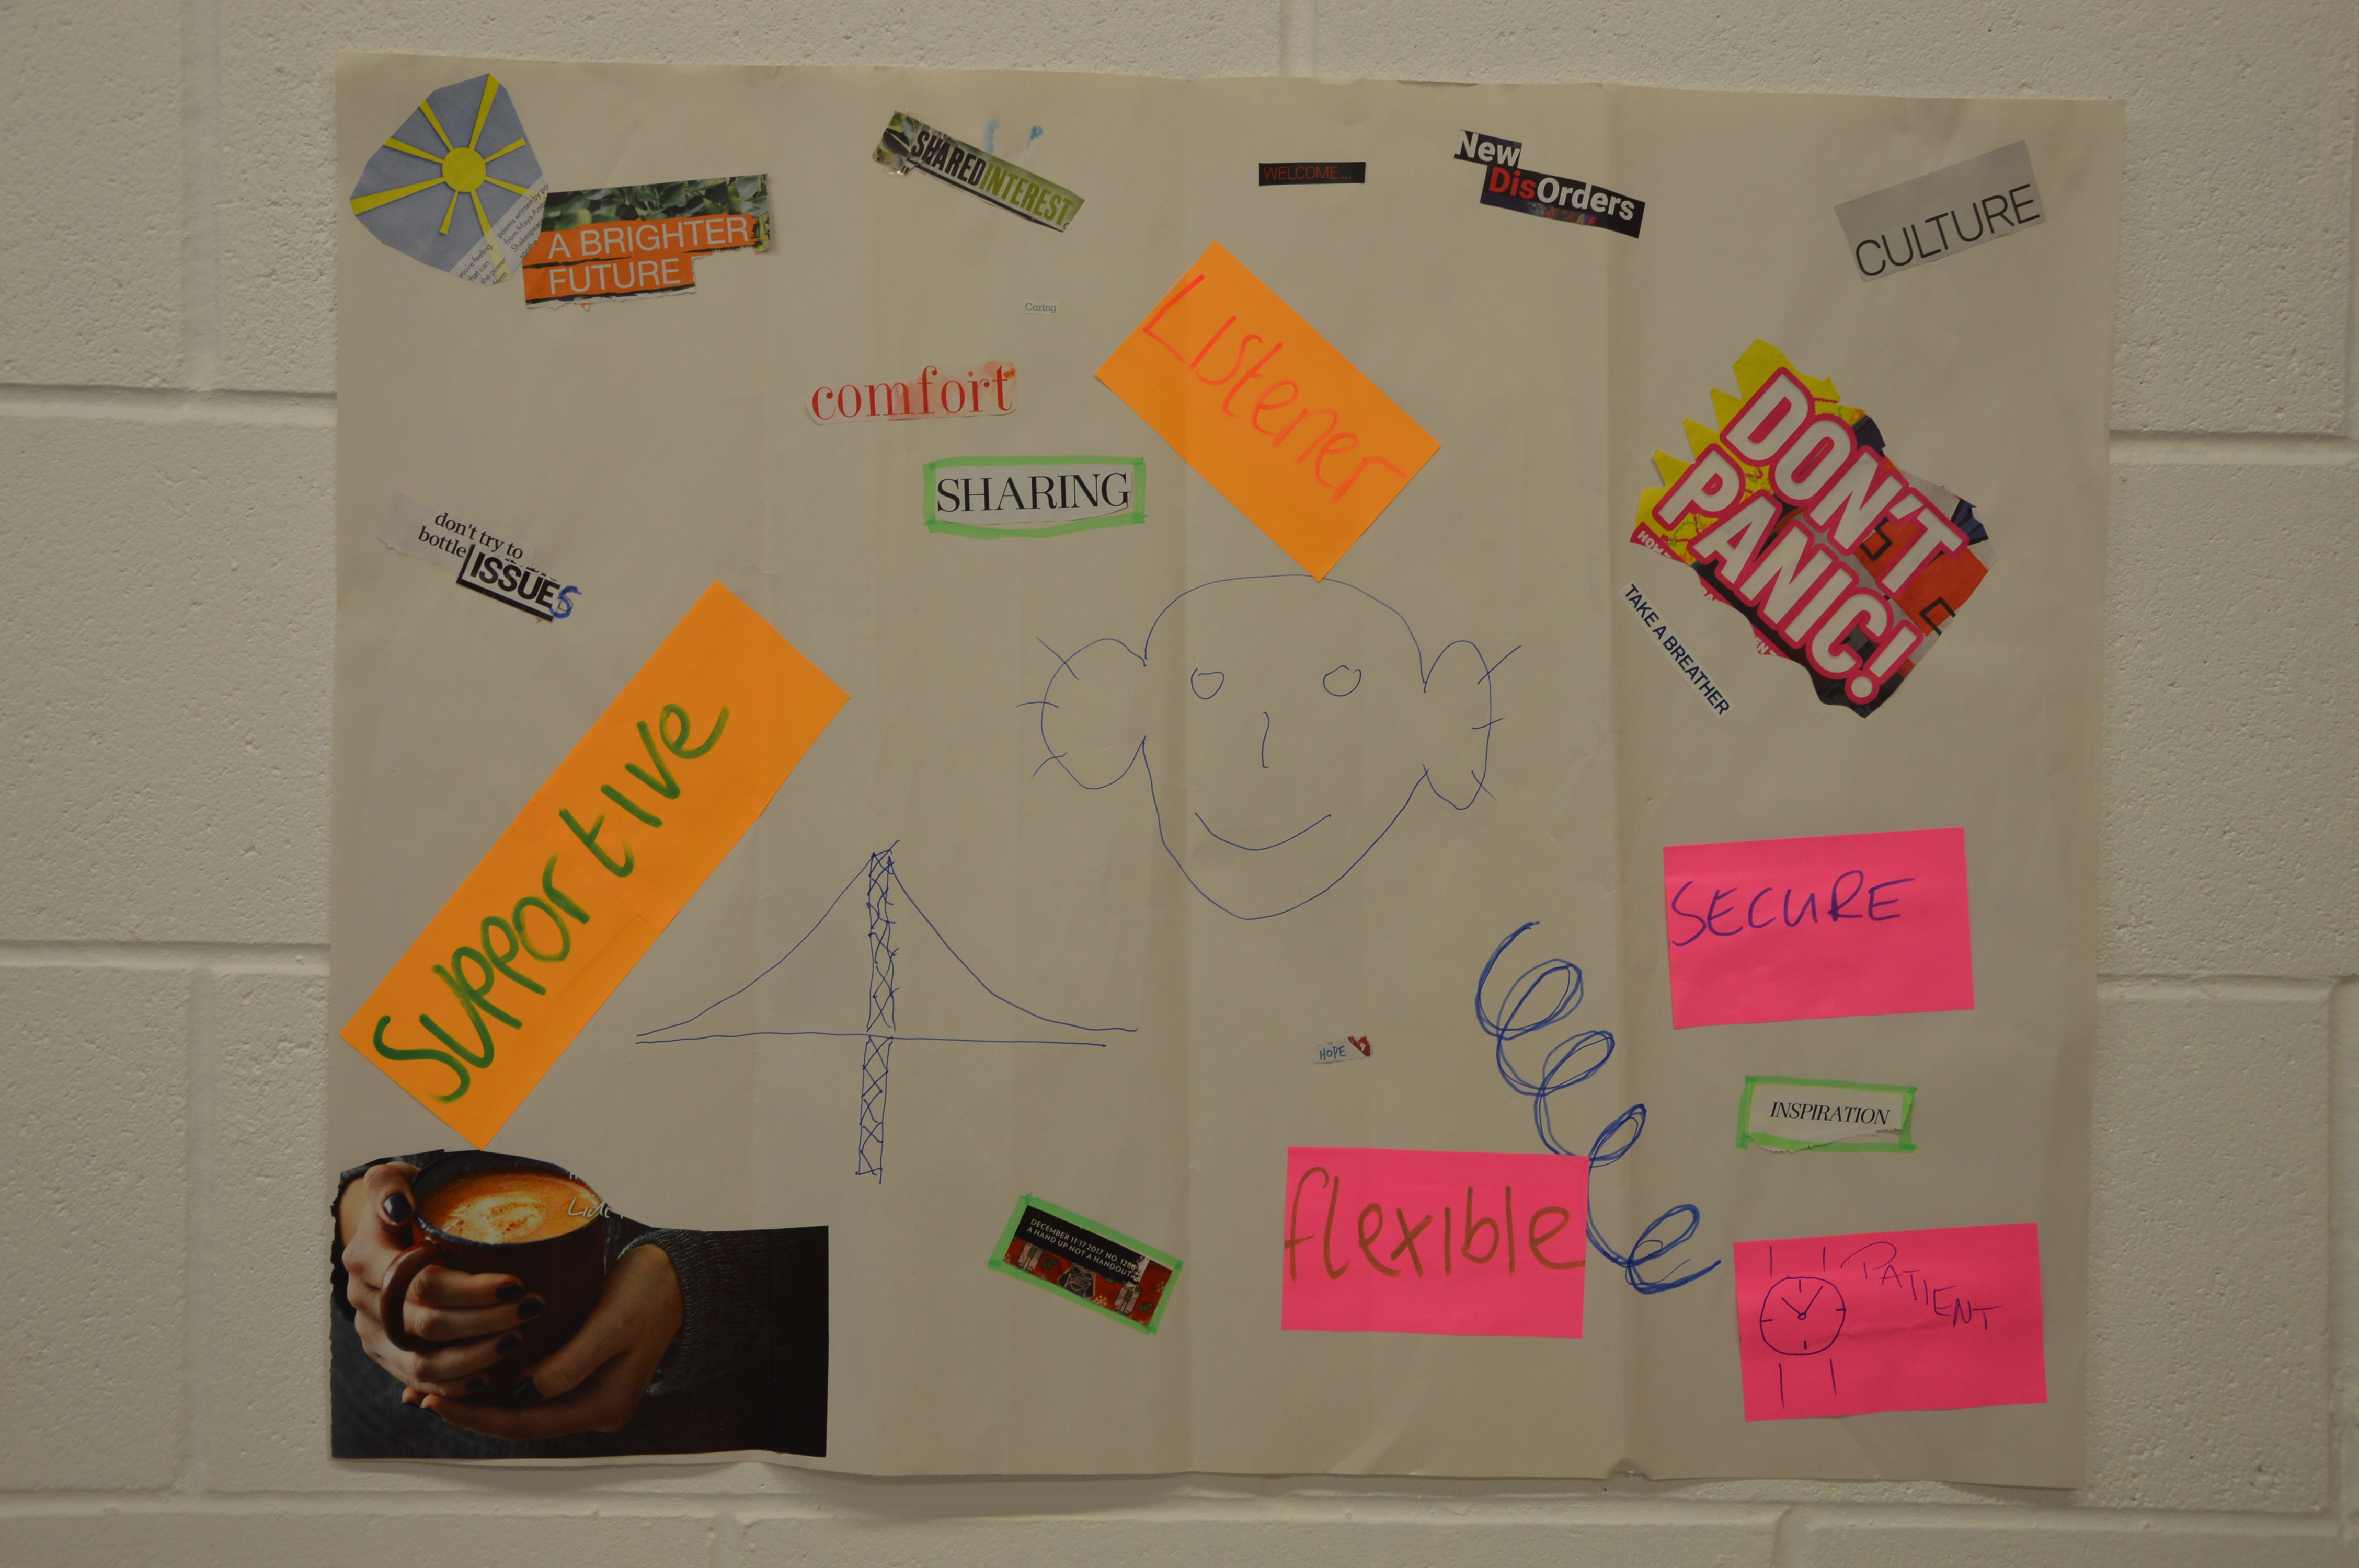 Recovery College "an Introduction to Peer Support" delivered by Peer Support Workers featured image